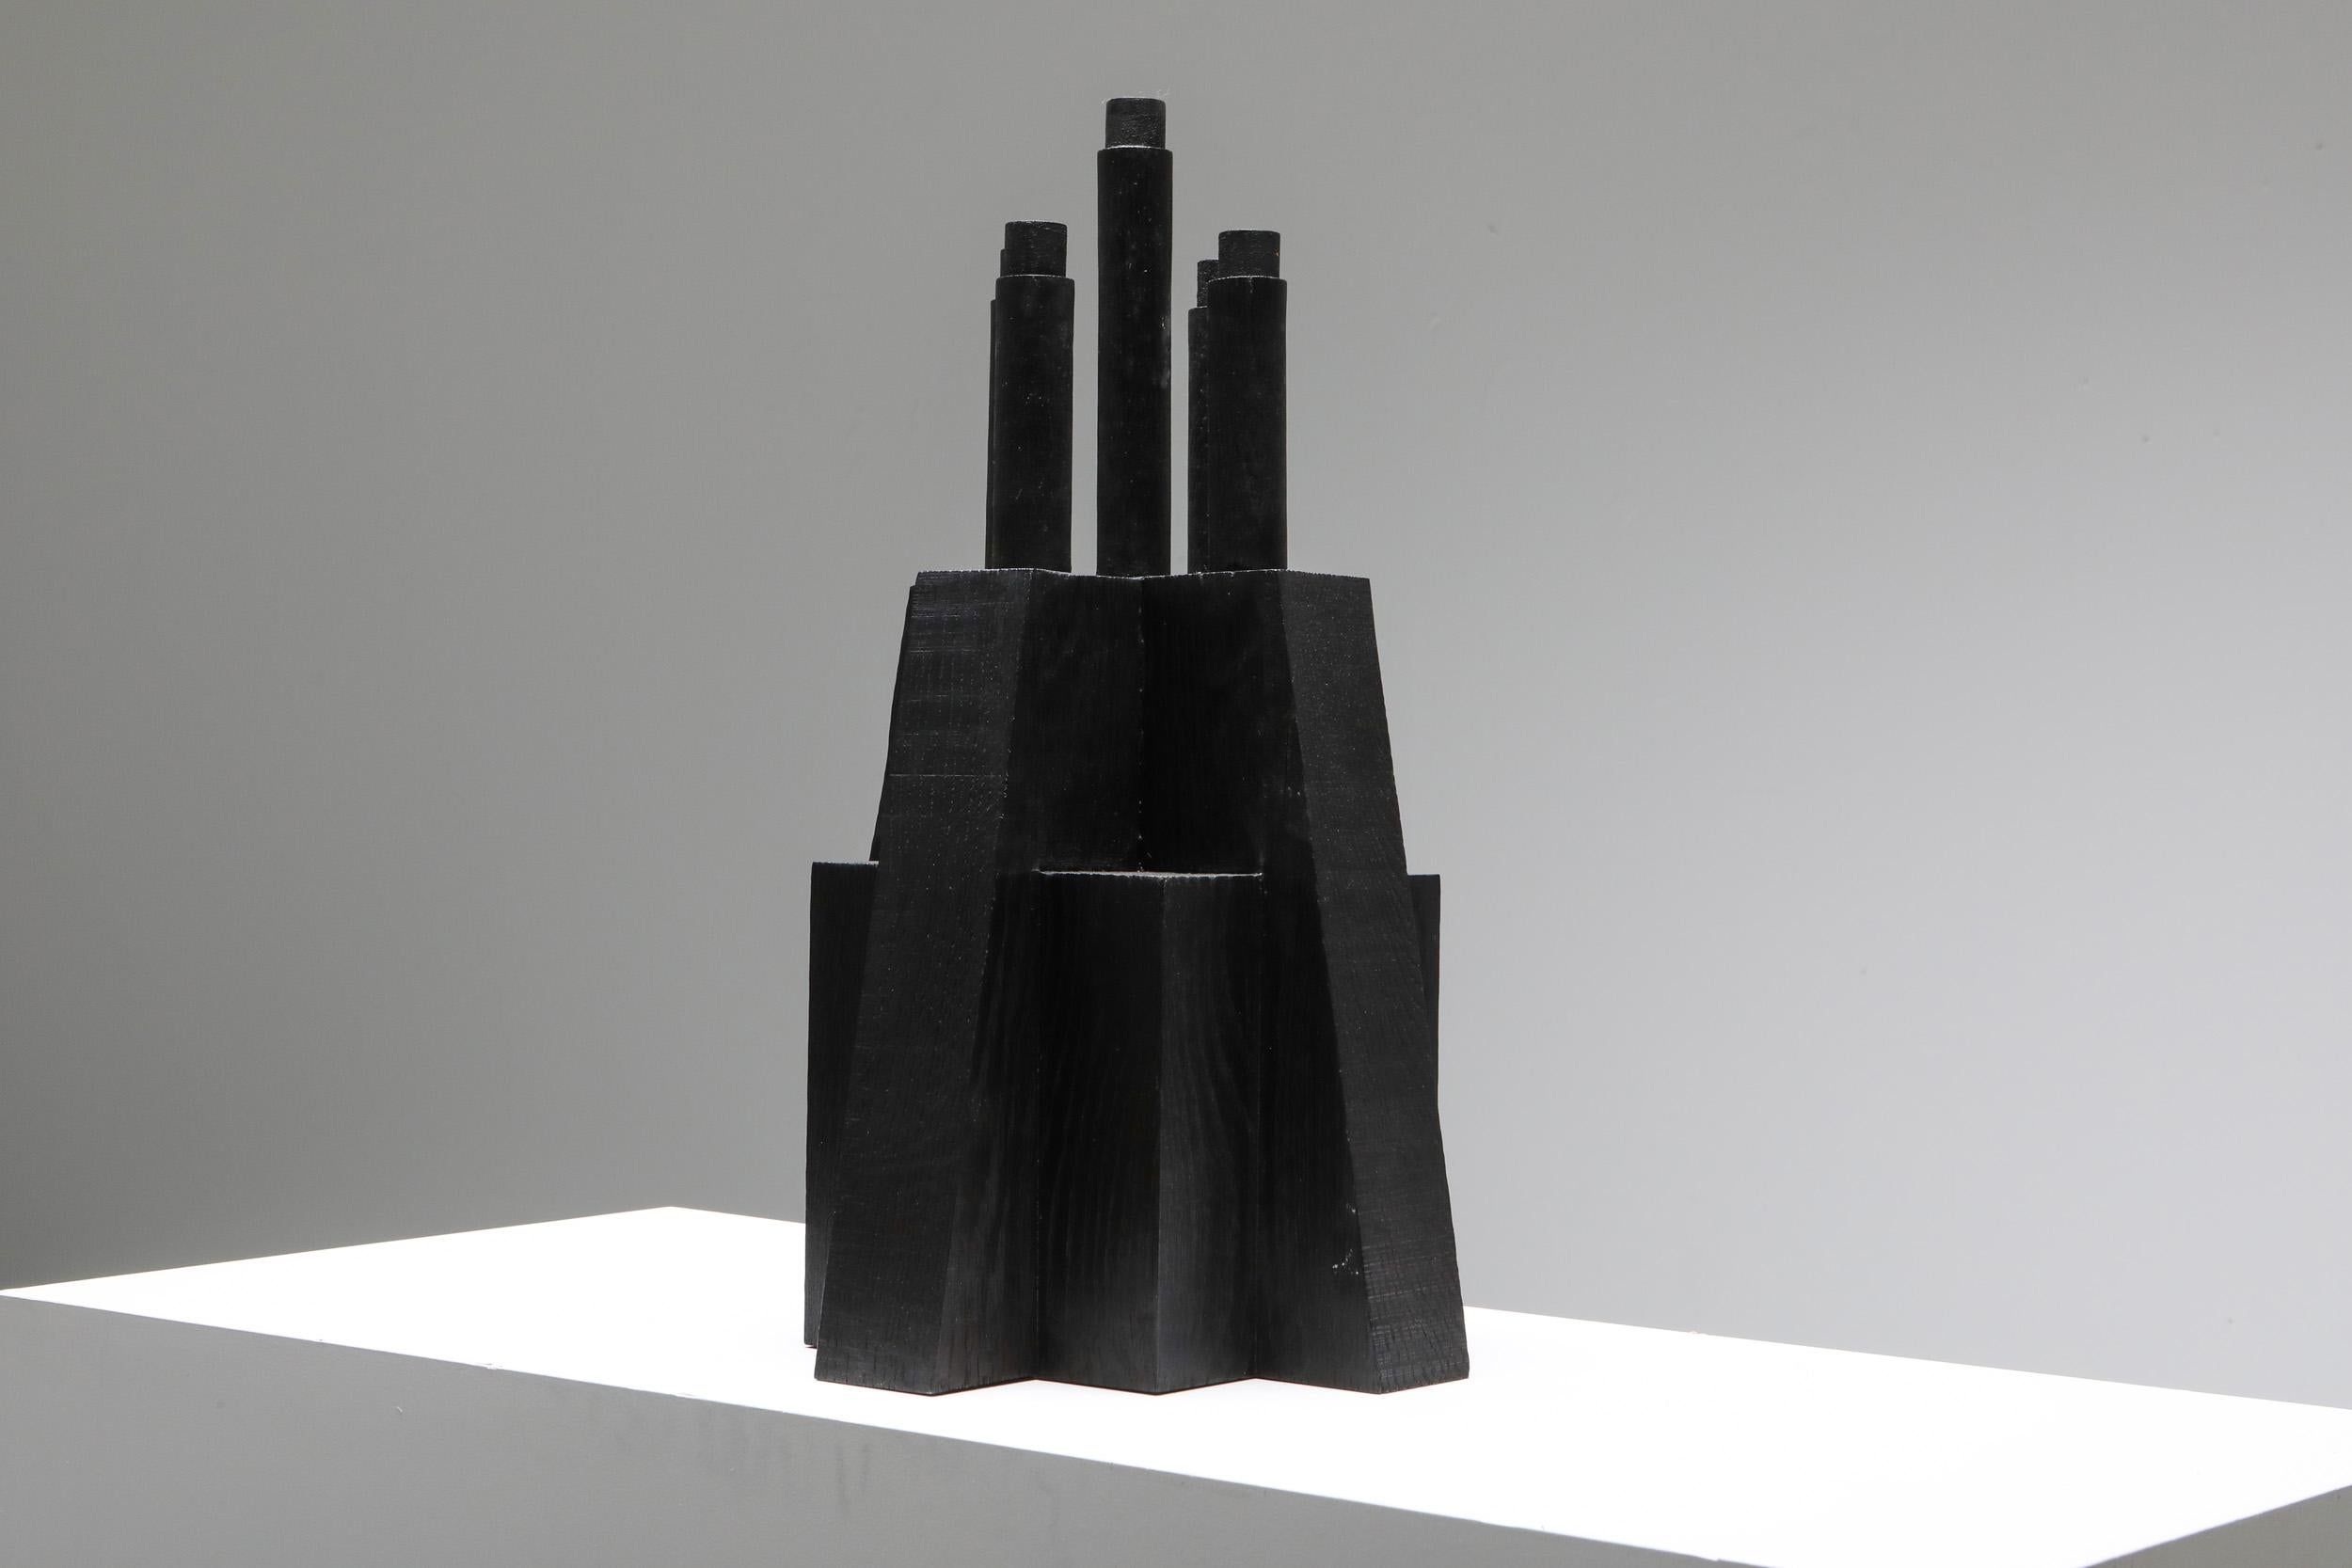 Brutalist and contemporary design piece,  by Arno Declercq

Made in burned and waxed oak
Measures: 32 cm wide x 32 cm long x 50 cm high / 12.6” wide x 12.6” long x 20” high

Belgian designer and art dealer, born in 1994, who makes bespoke objects